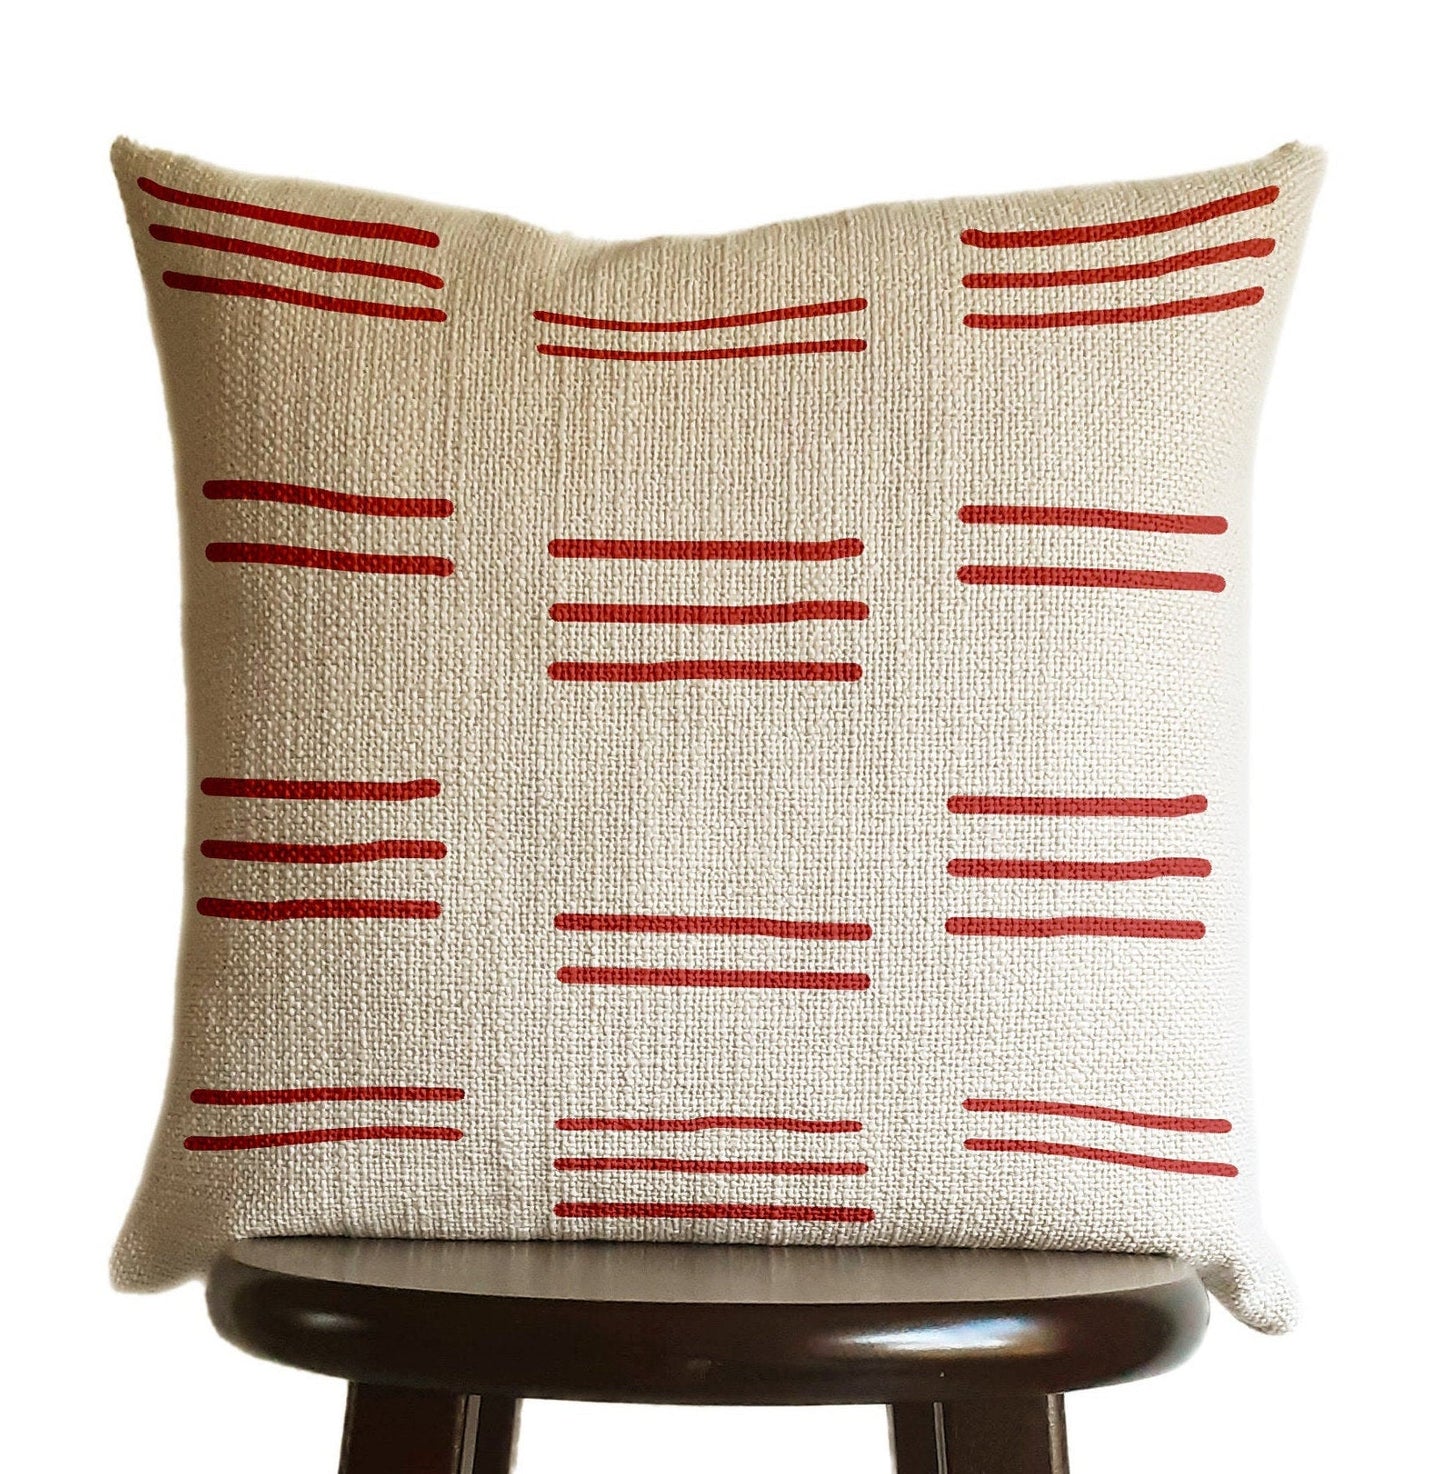 Mudcloth Pillow Cover Clay Red, Lines Print in Natural Oatmeal Color Textured Woven Fabric Modern Boho Home Decor - 18x18"